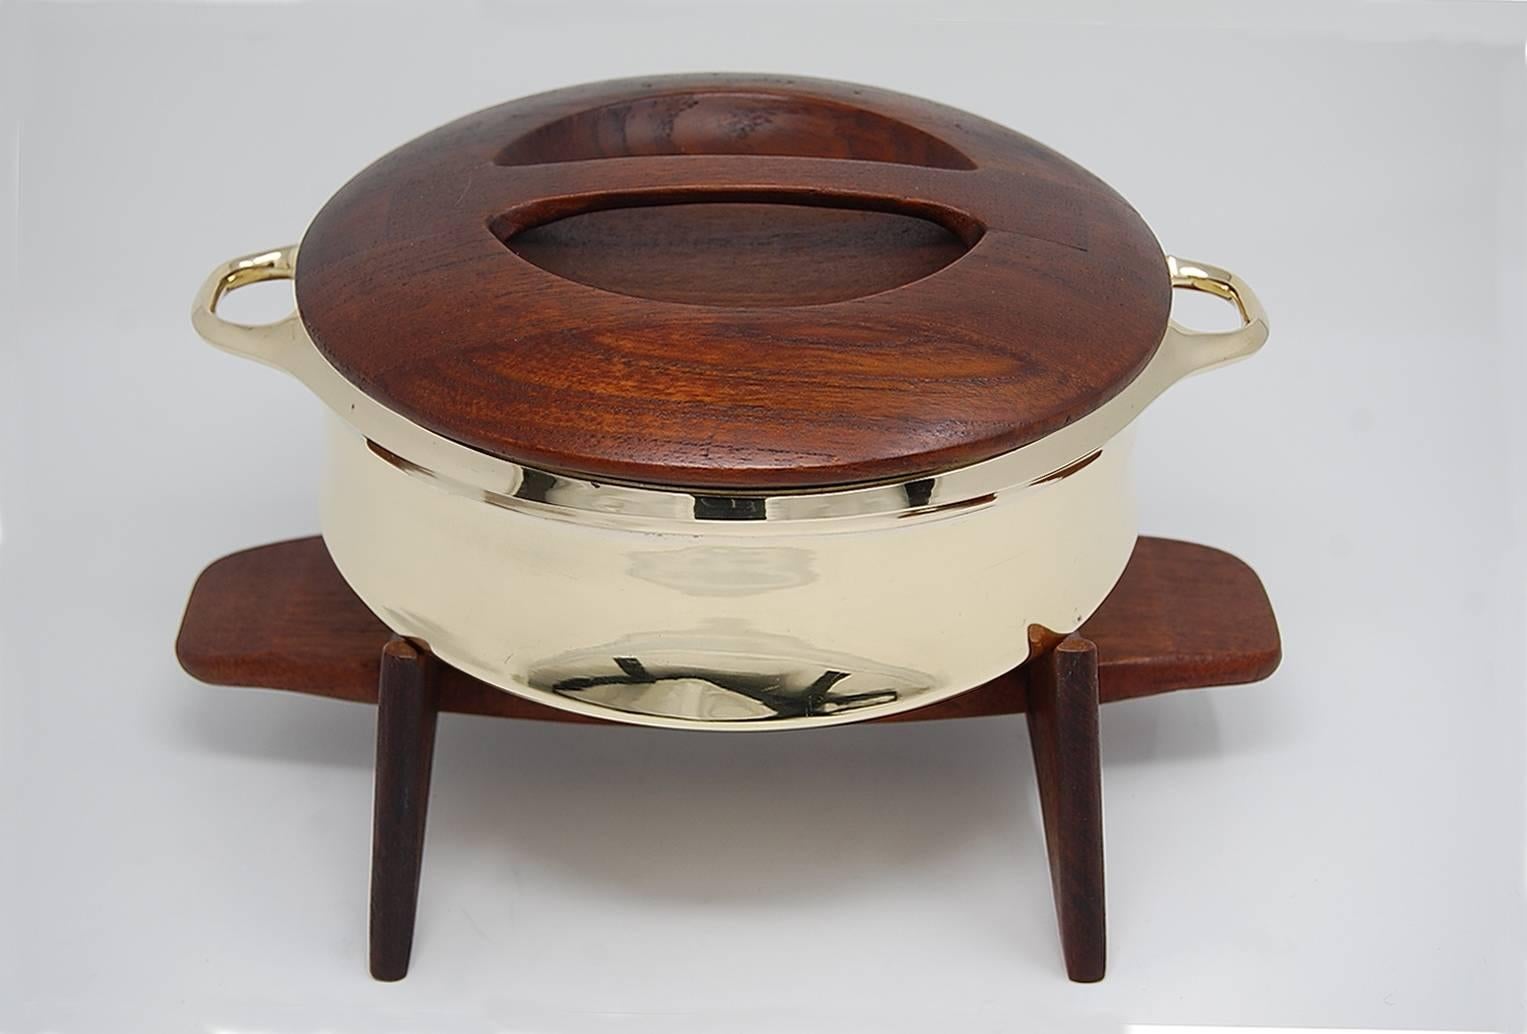 Fondue pot designed by Jens Quistgaard for Dansk of Denmark, circa 1955. Solid brass pot, with staved teak top, and solid teak base. Fully signed with early Dansk marks. The craftsmanship on this piece is outstanding. Newly polished brass, and